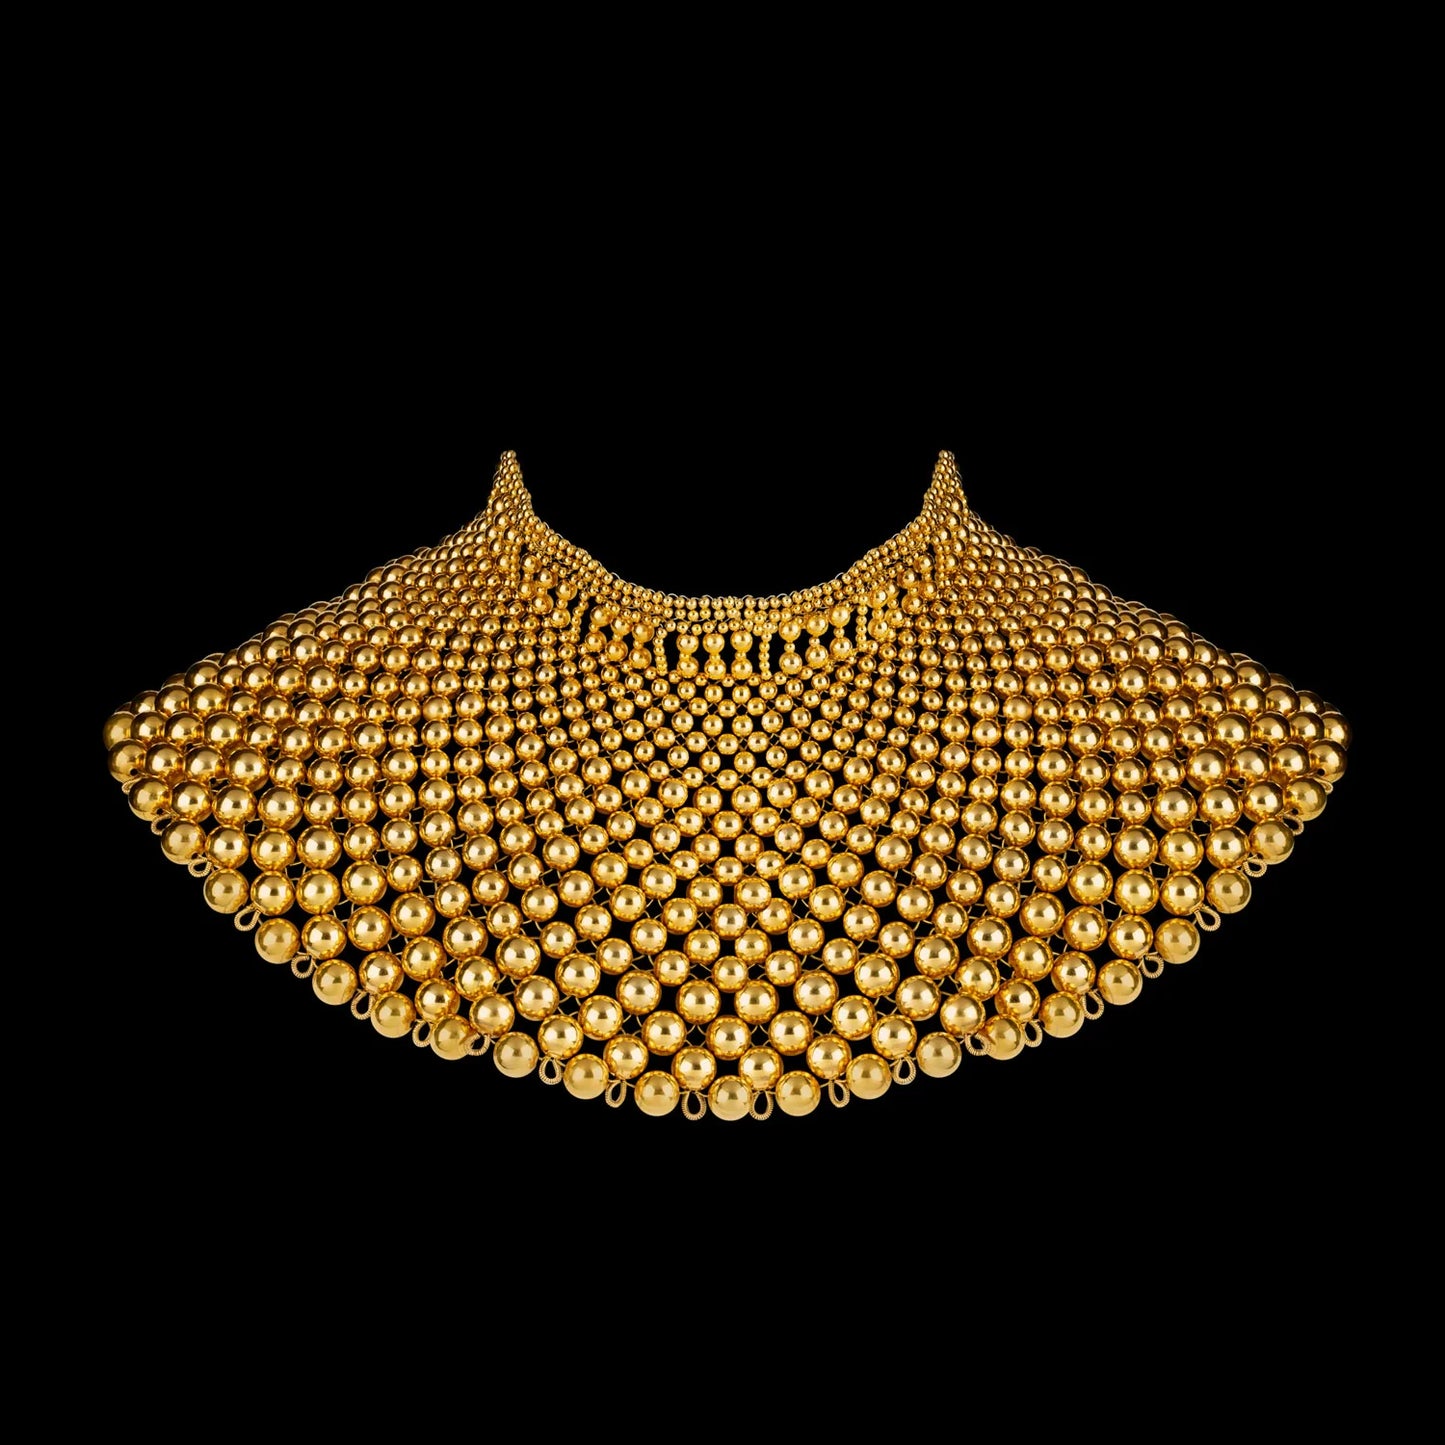 Gold Namaka modular necklace w/removable chain tassels